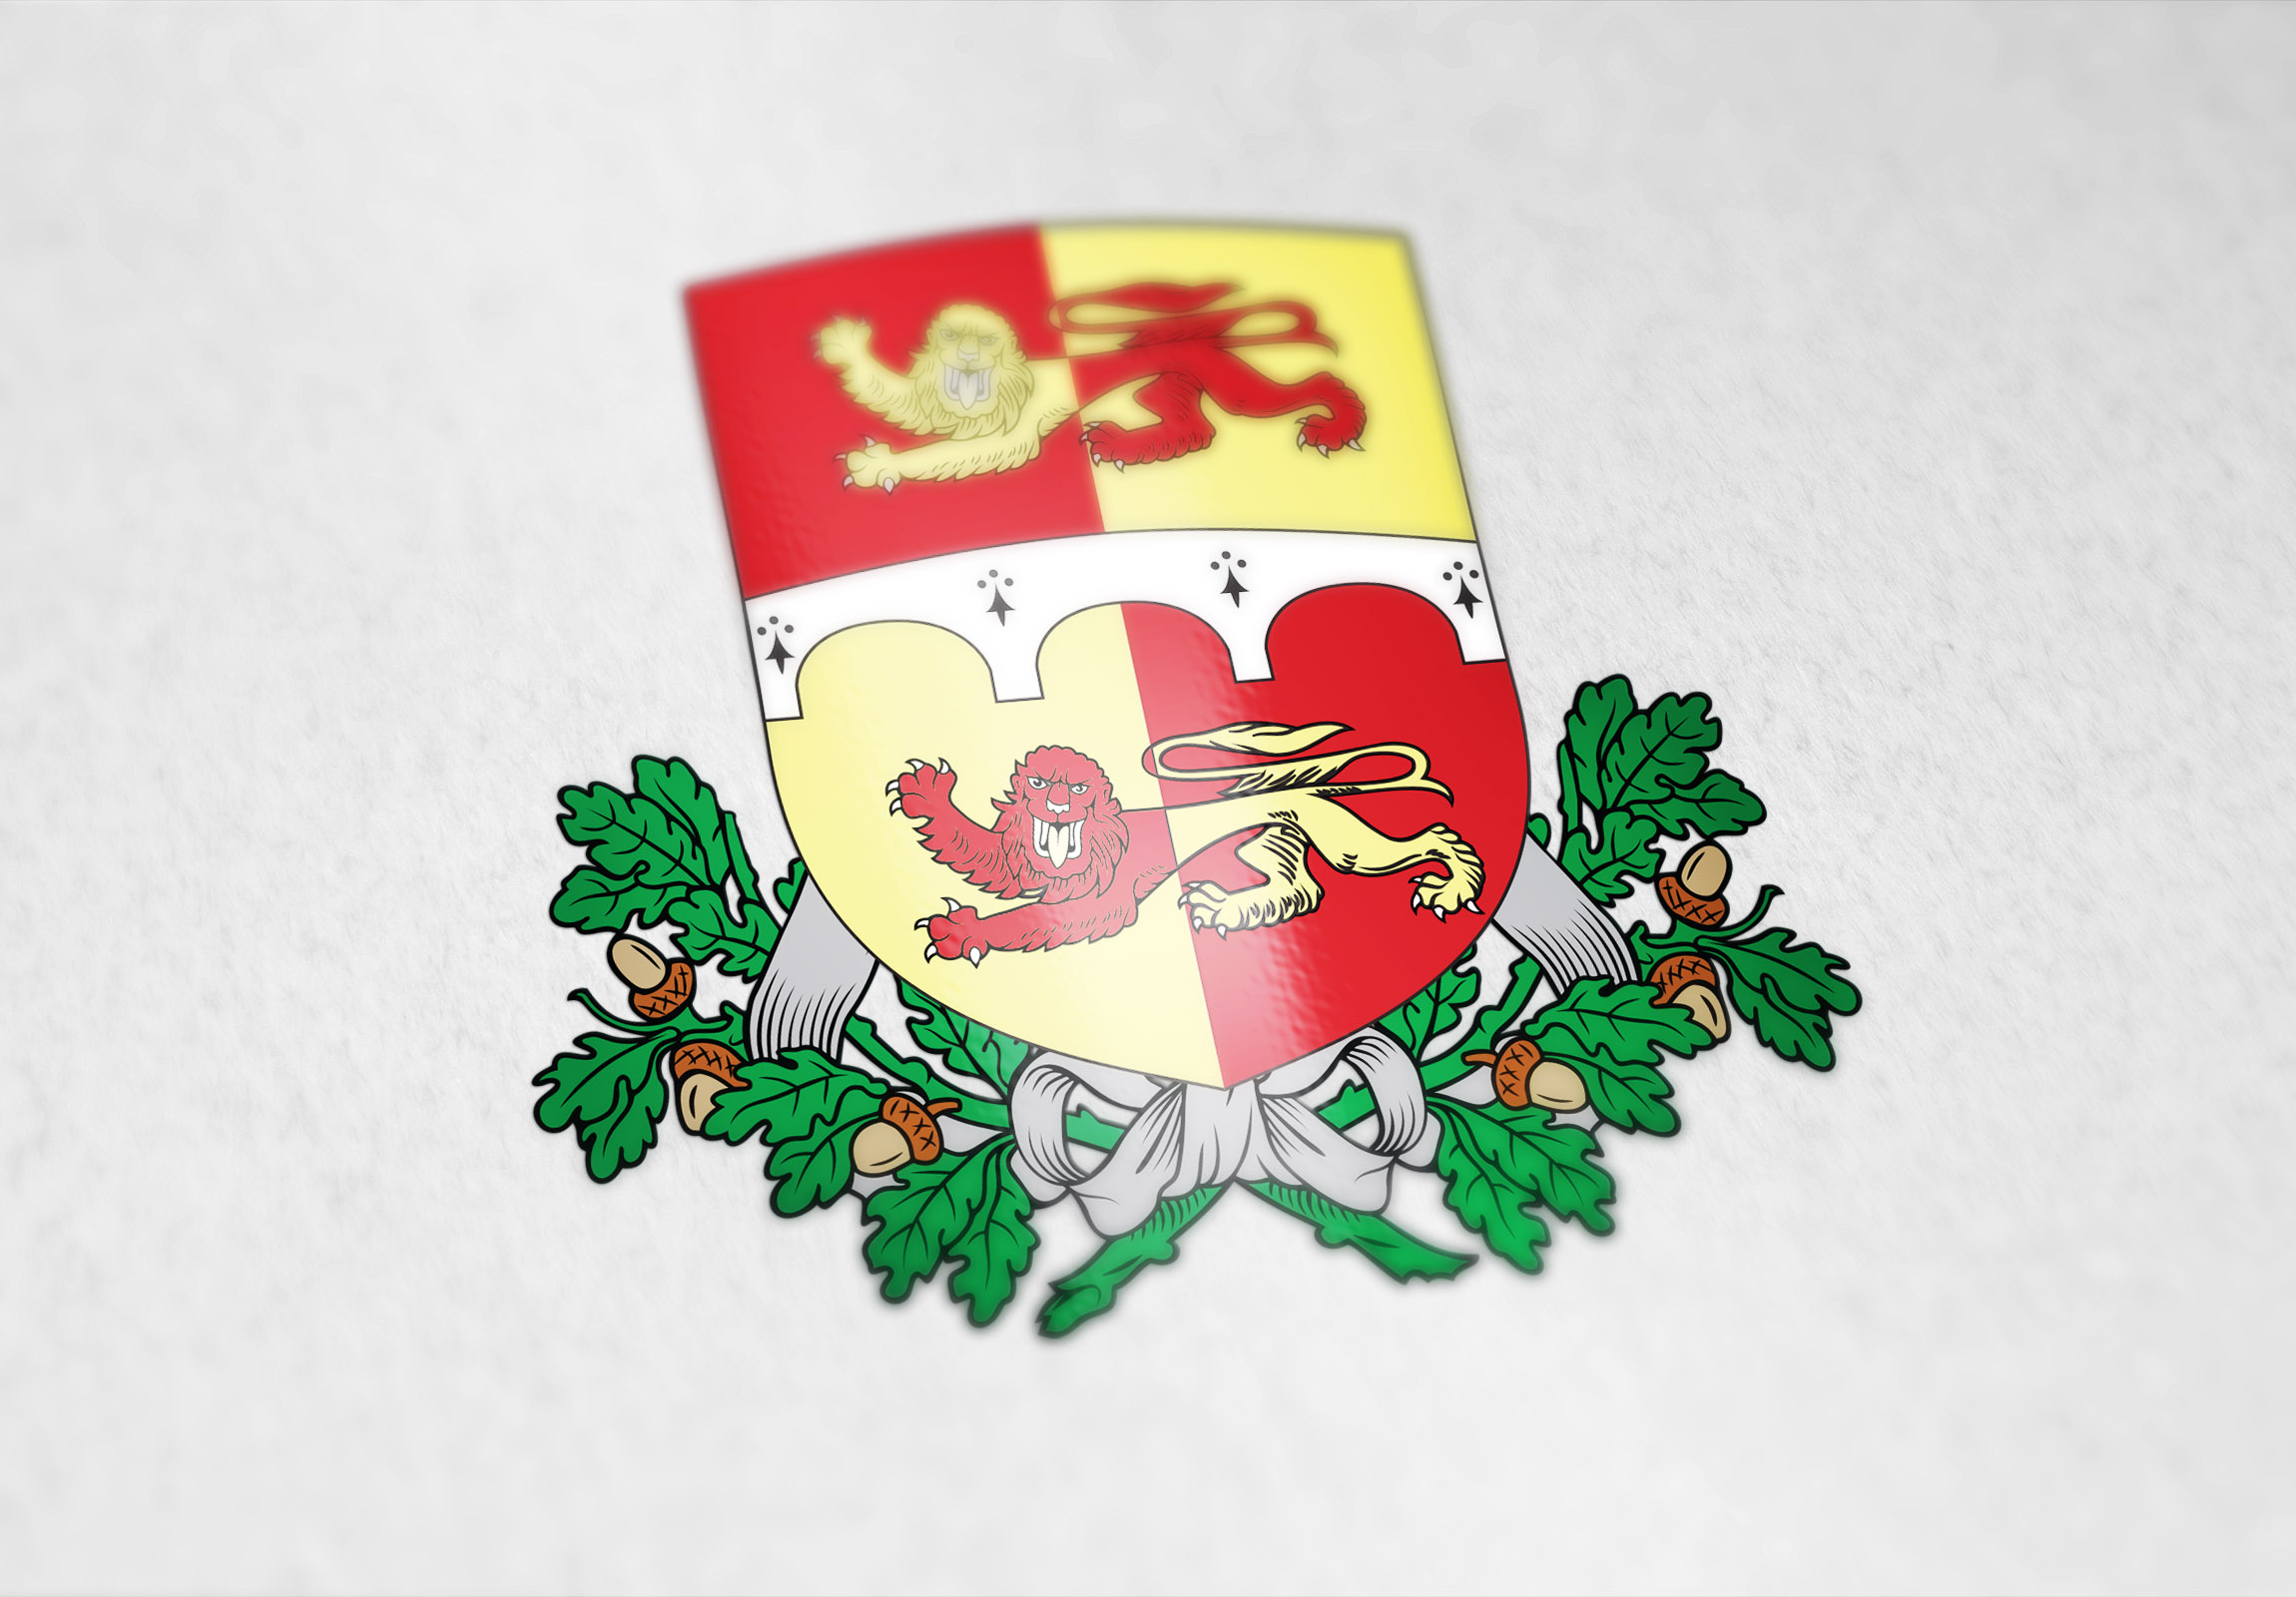 Coat of arms designed for a bridge presentation in the UK